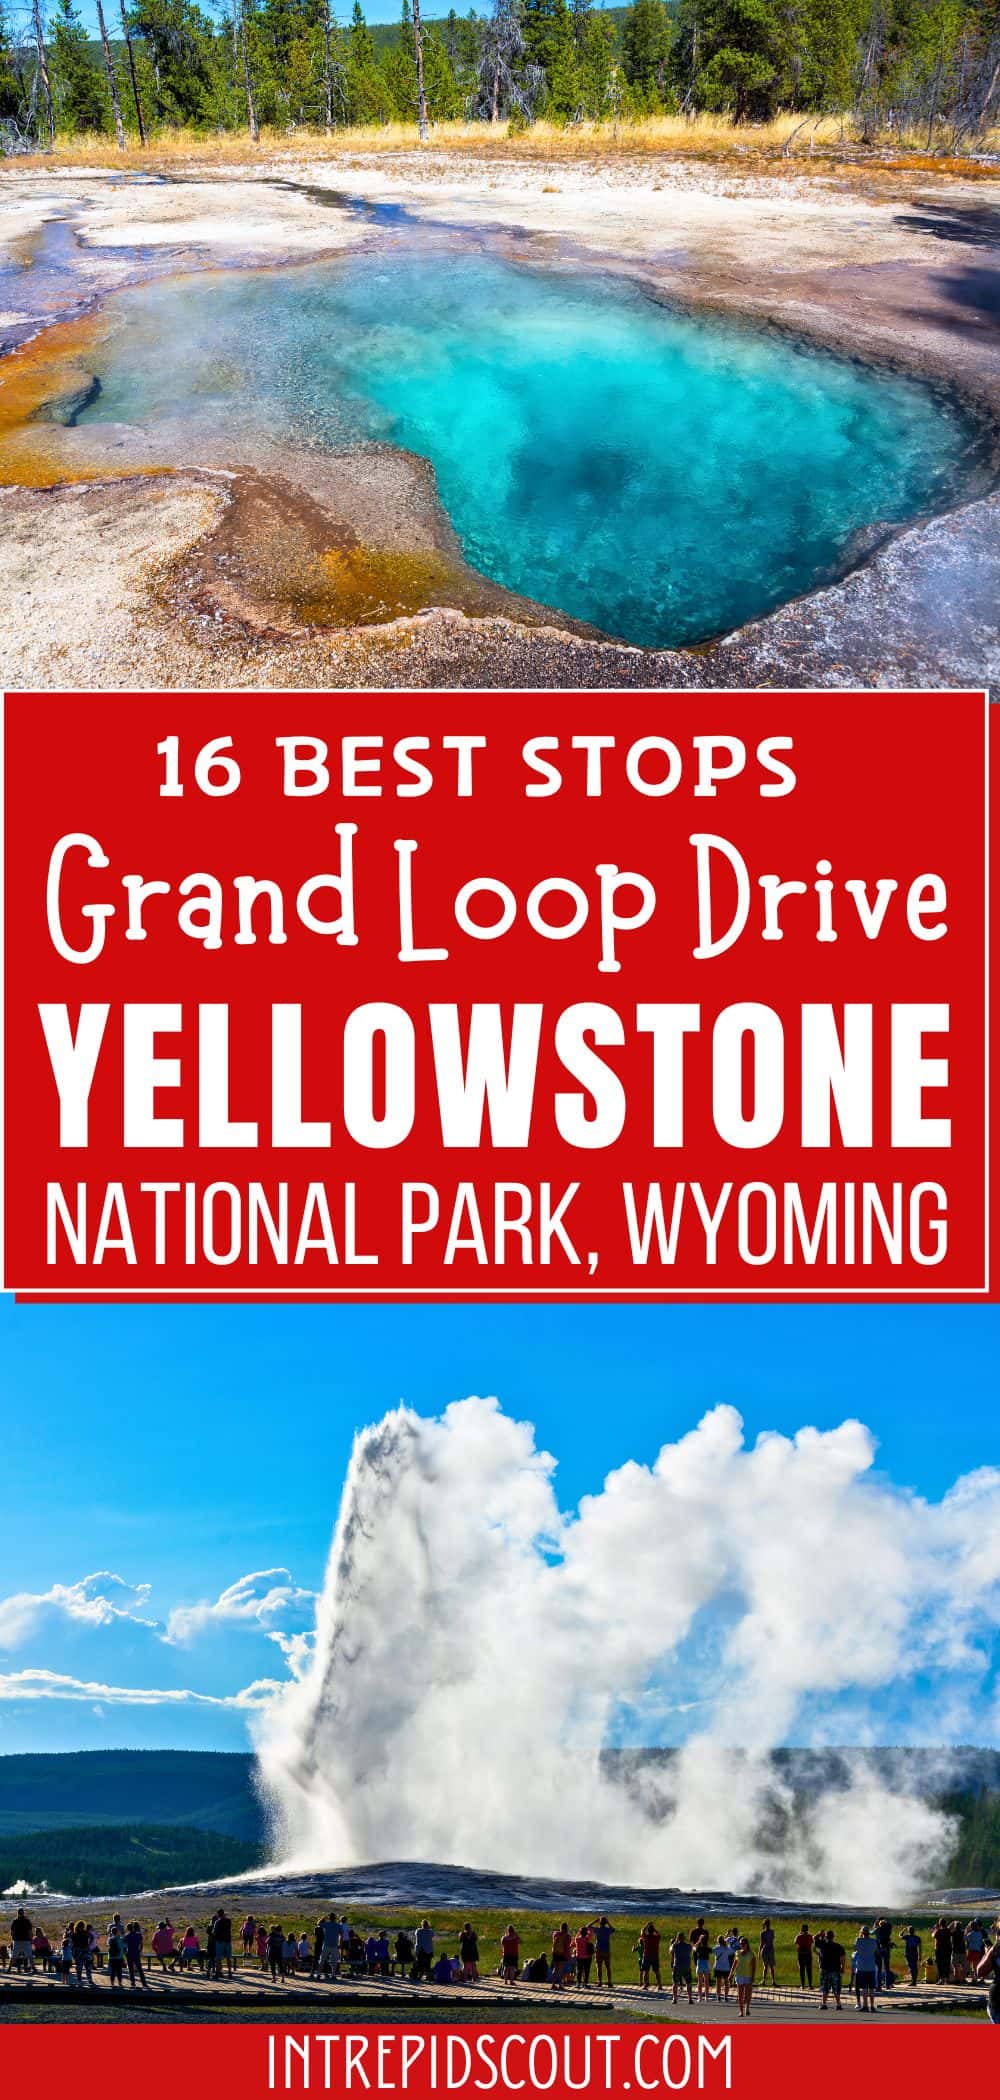 Best Stops on Yellowstone Grand Loop Drive